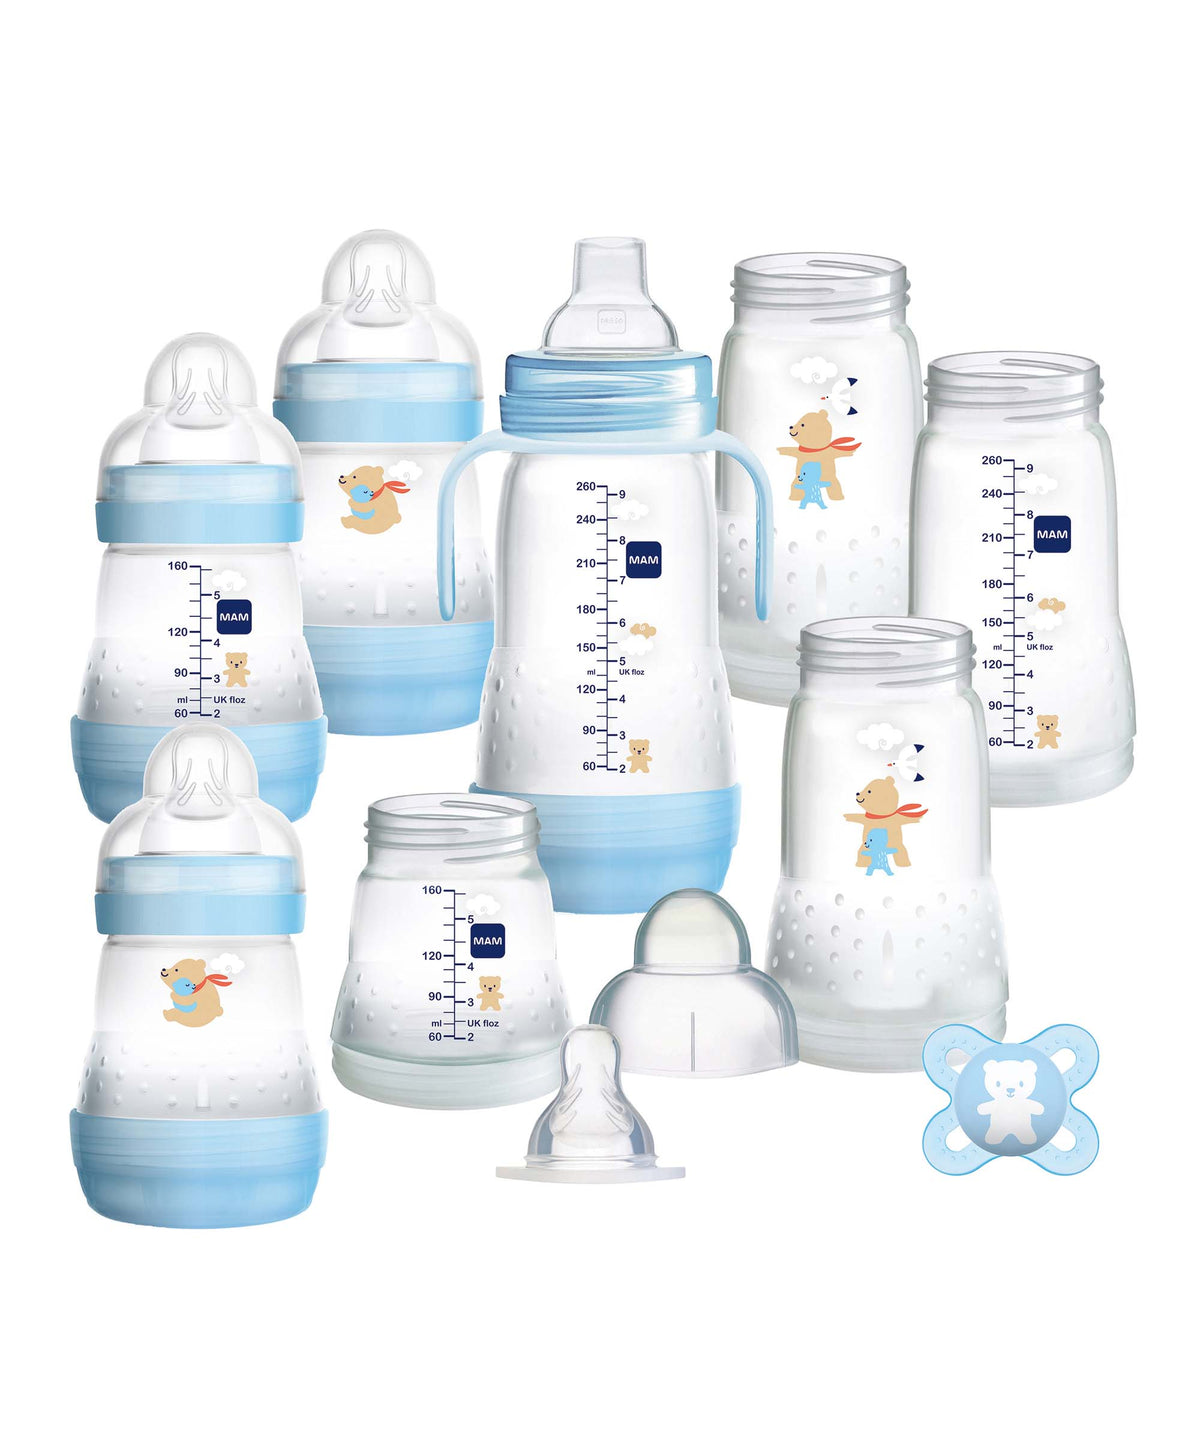 Baby Bottles and Cups - Frequently Asked Questions